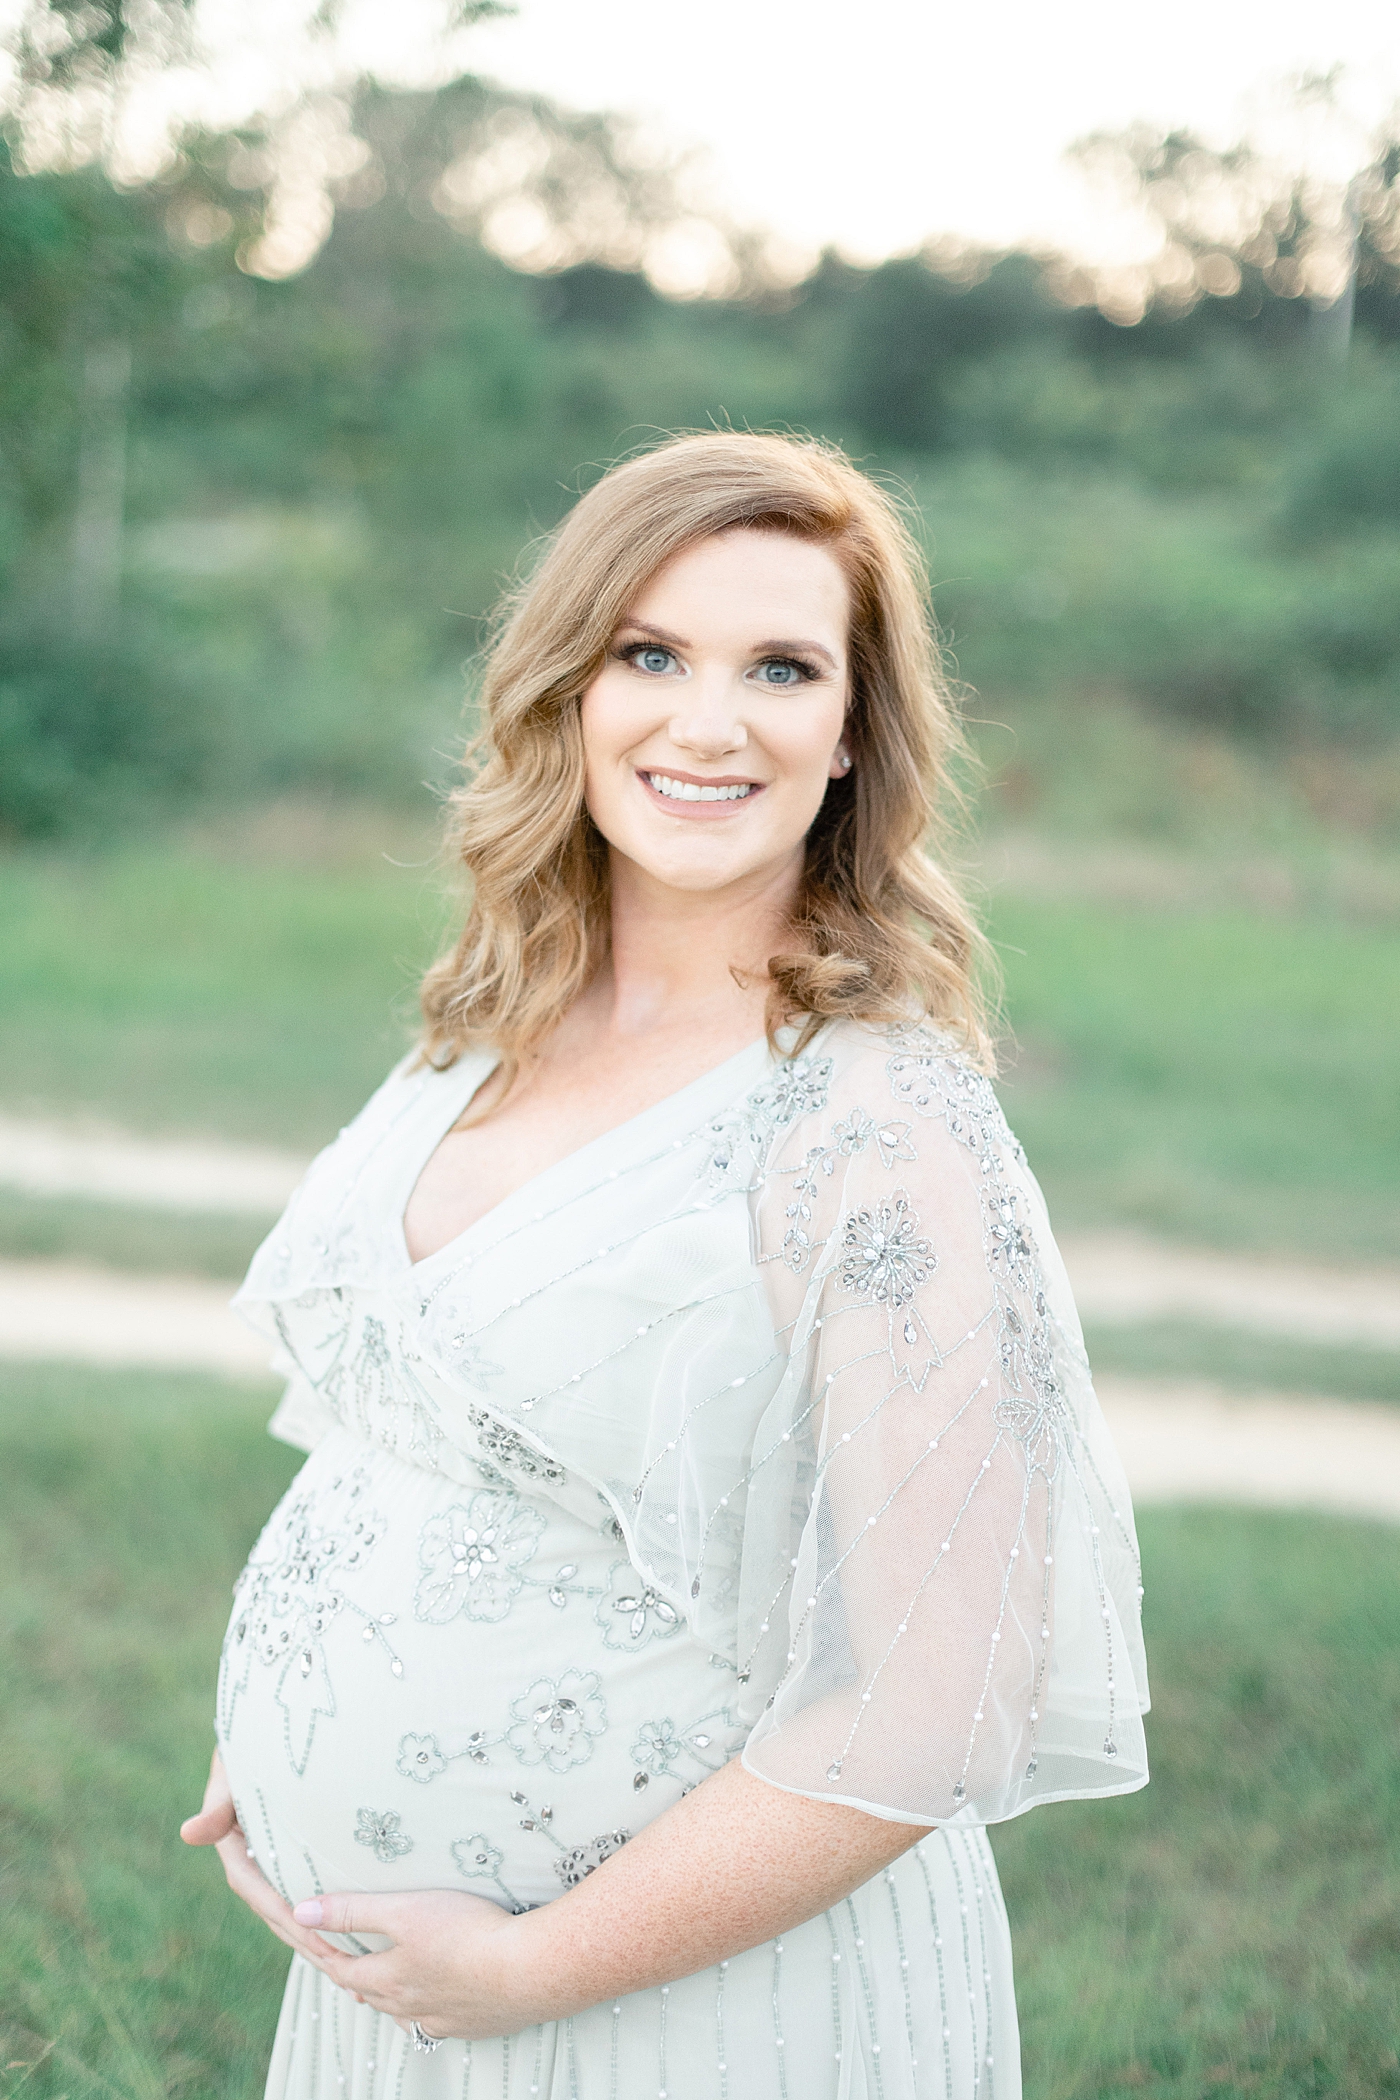 Mother to be in jeweled dress smiling | Photo by Little Sunshine Photography 